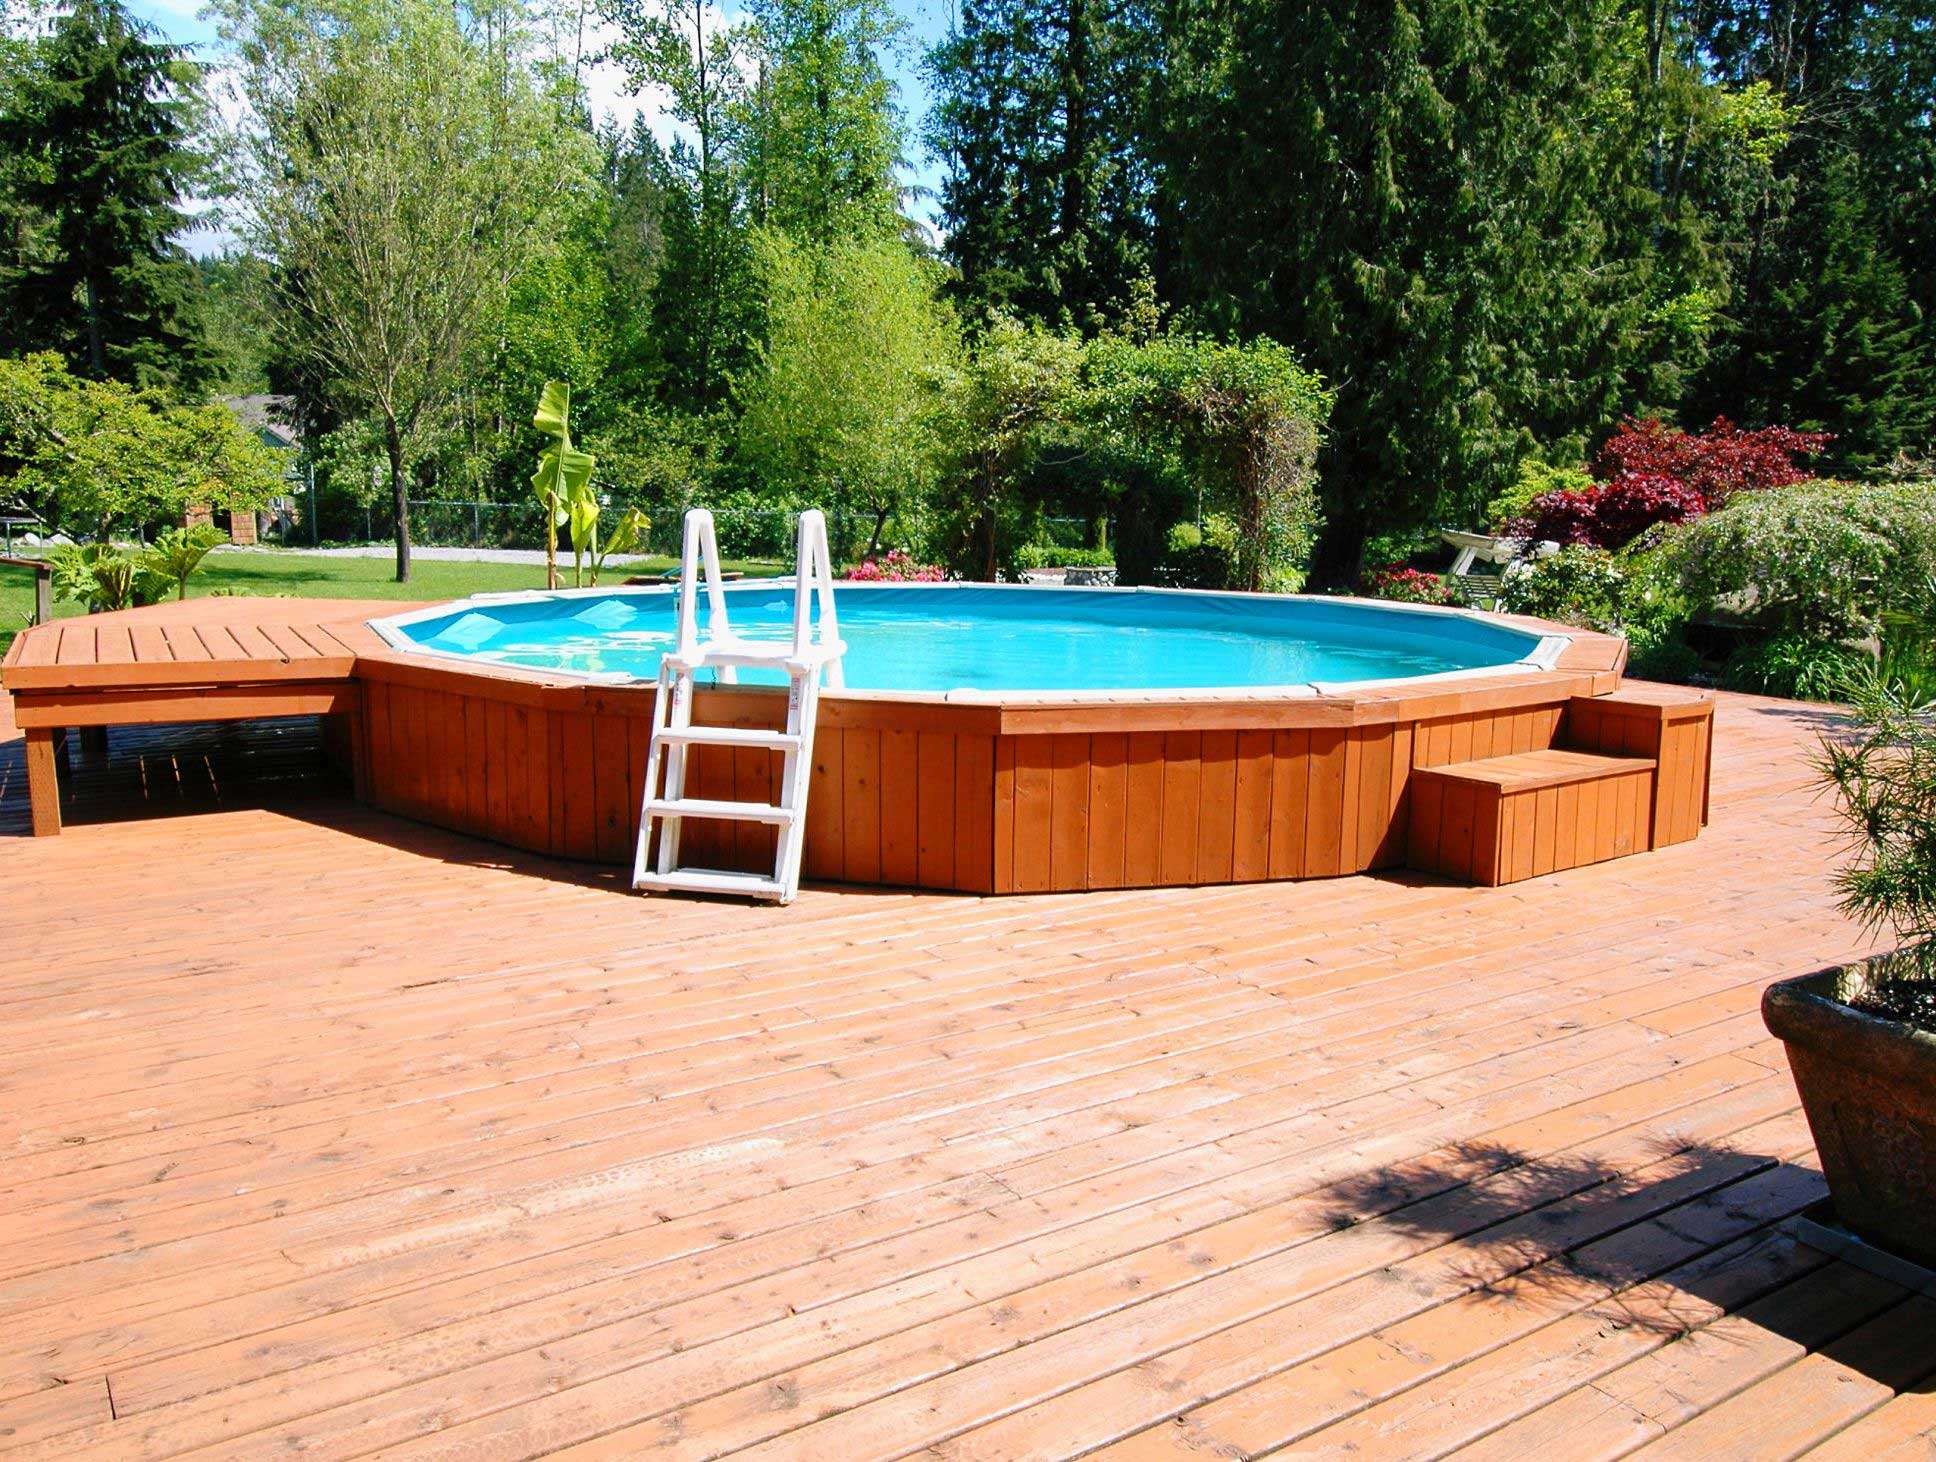 Rectangular Above Ground Swimming Pools Ideas To Decorate Your Backyard | Roy Home Design